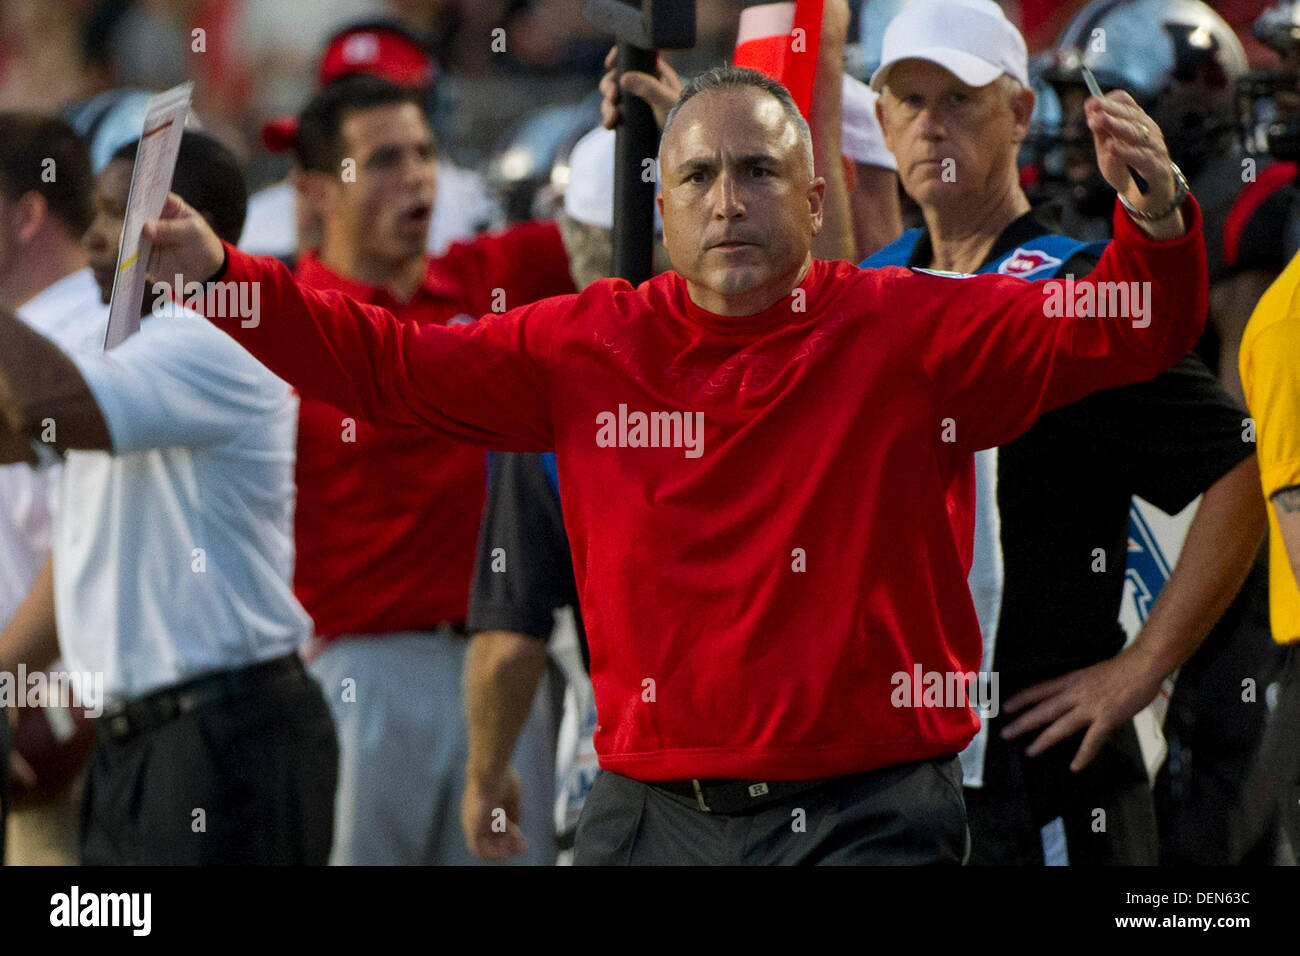 Piscataway, New Jersey, USA. 21st Sep, 2013. September 21, 2013: Rutgers Scarlet Knights head coach Kyle Flood gestures to the fans during the game between Arkansas Razorbacks and Rutgers Scarlet Knights at Highpoint Solutions Stadium in Piscataway, NJ. Rutgers Scarlet Knights defeated The Arkansas Razorbacks 28-24. Credit:  csm/Alamy Live News Stock Photo